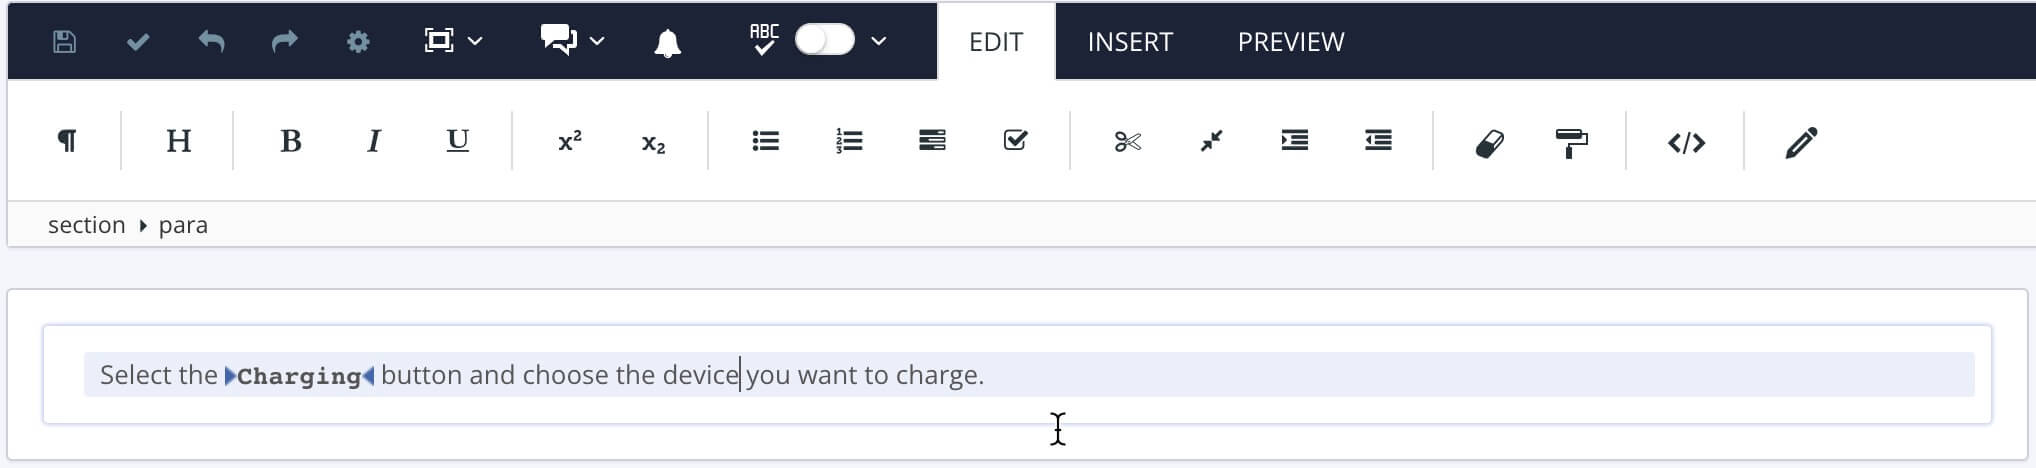 Paligo editor. A paragraph is shown. Its inline emphasis element has been removed. The content that was inside the emphasis element remains in place.